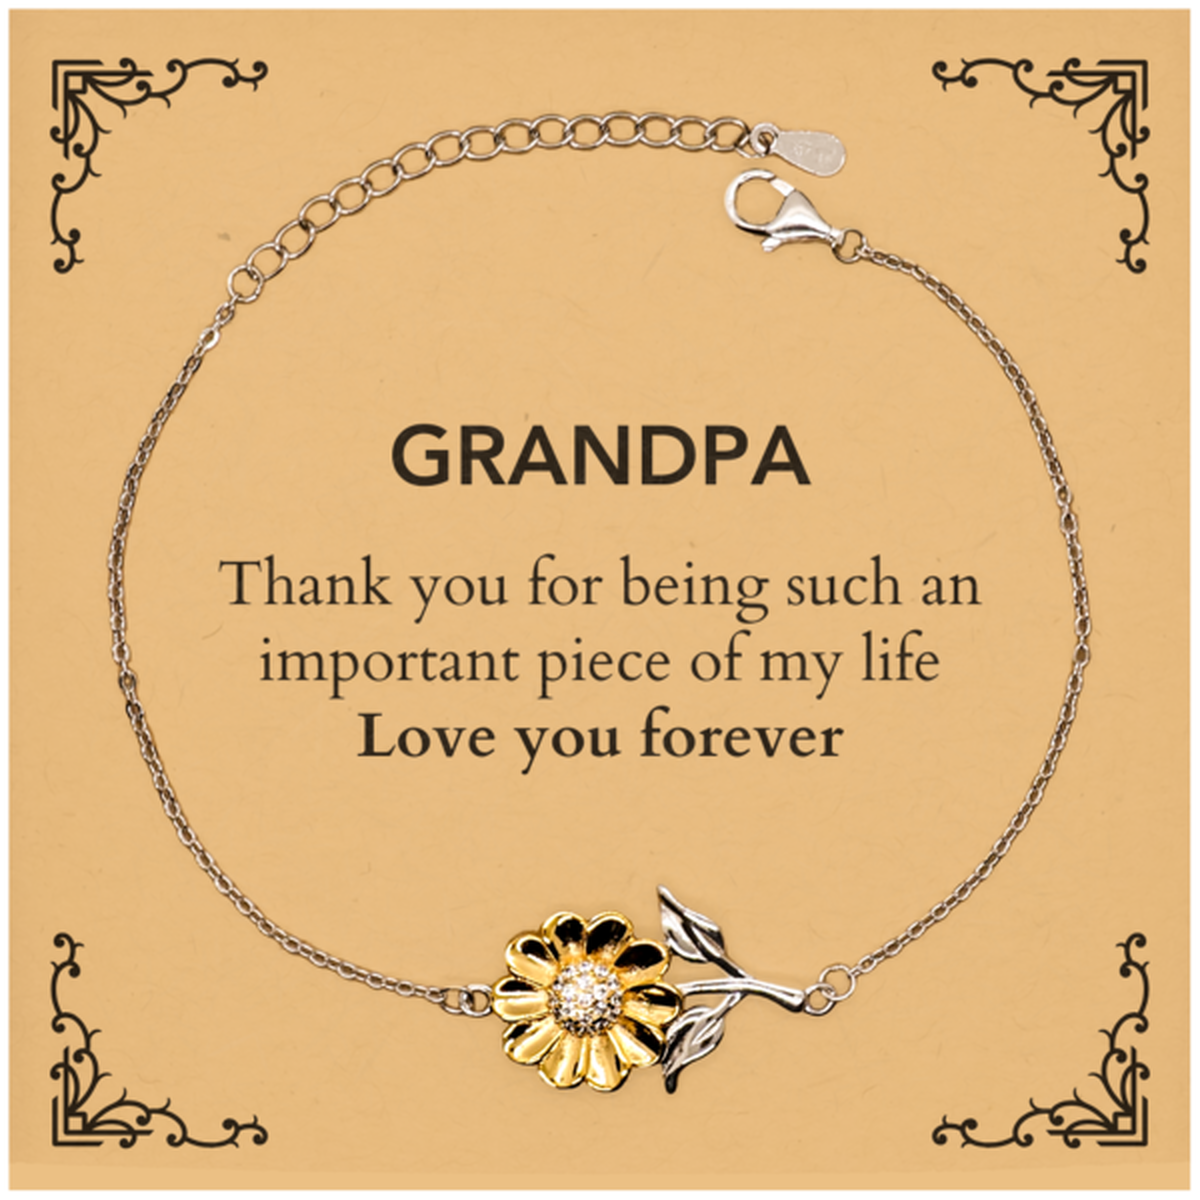 Appropriate Grandpa Sunflower Bracelet Epic Birthday Gifts for Grandpa Thank you for being such an important piece of my life Grandpa Christmas Mothers Fathers Day